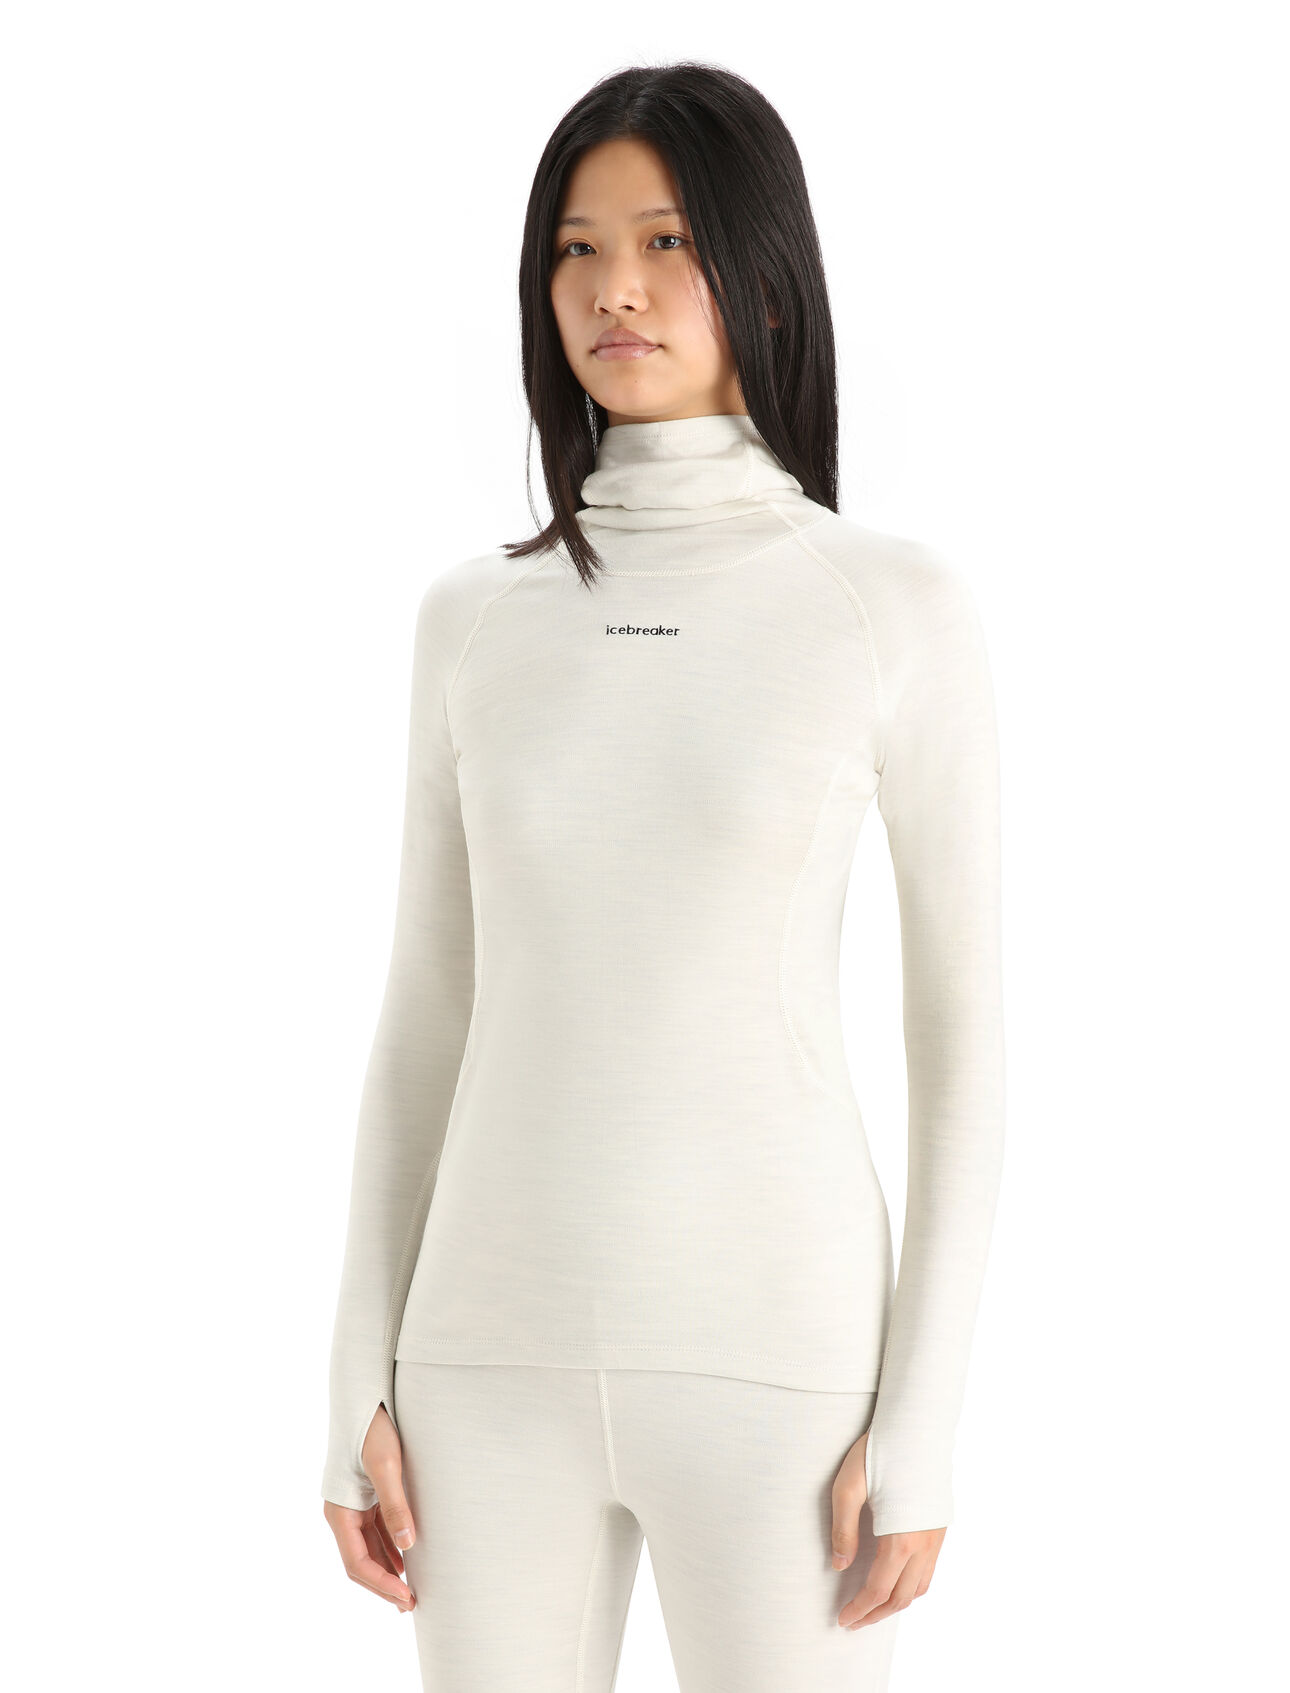 Womens MerinoFine™ Long Sleeve Roll Neck A premium, slim-fit base layer made with luxuriously soft 15.5 micron merino wool fibers and a high-neck design for added protection, the MerinoFine™ Long Sleeve Roll Neck is at the intersection of comfort and performance.